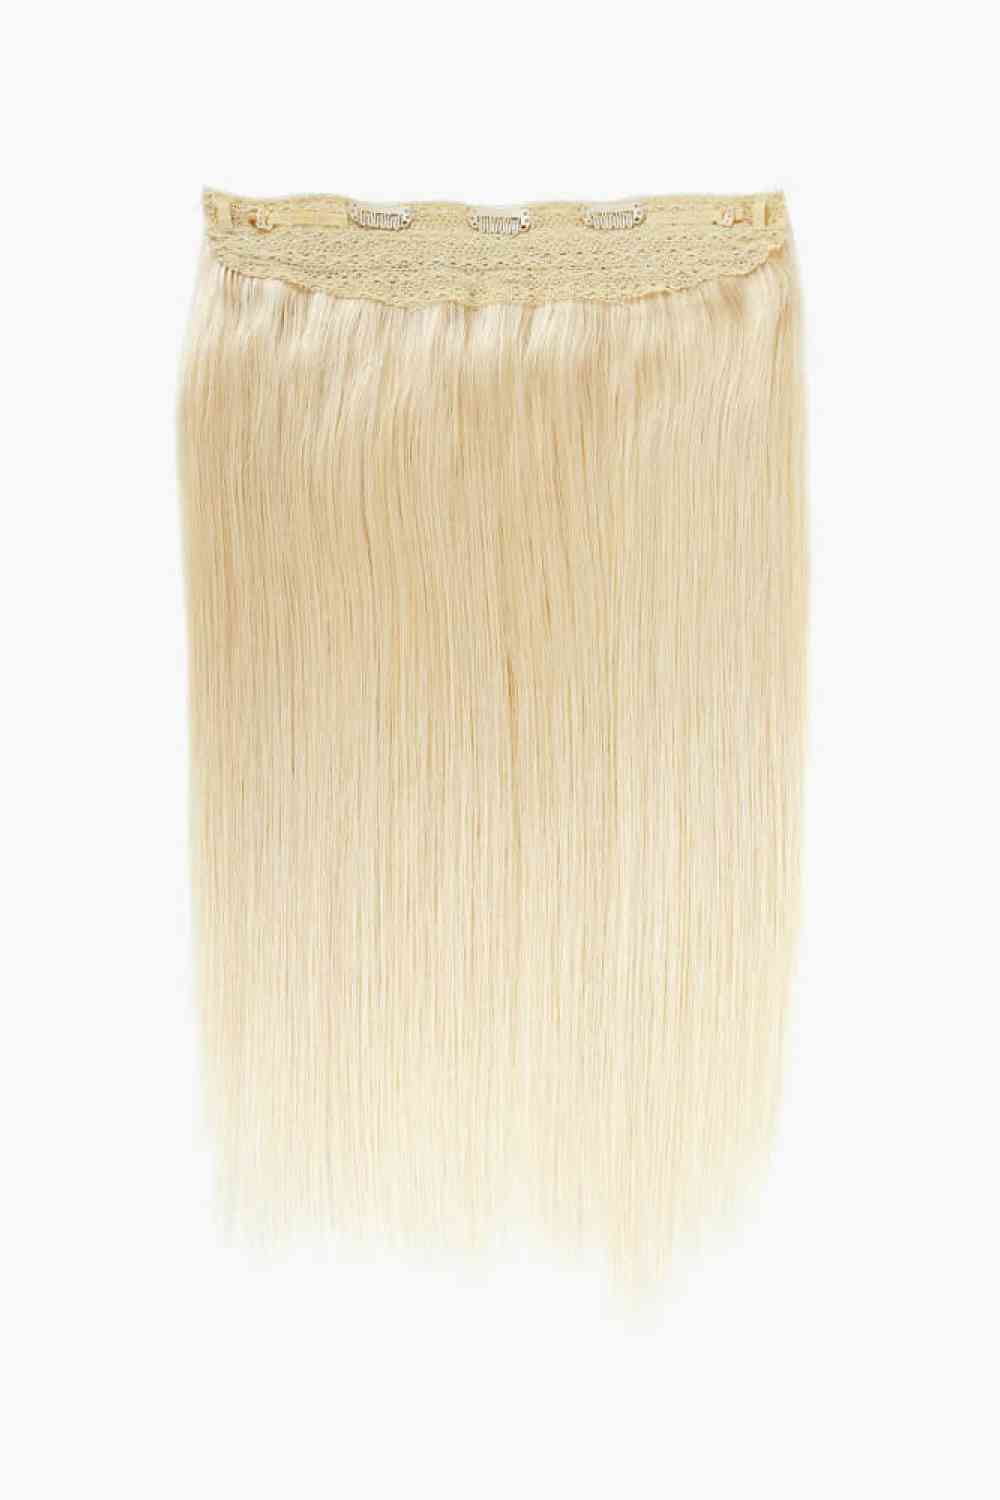 22" 100g Fully Handmade Straight Indian Human Halo Hair Blonde One Size 